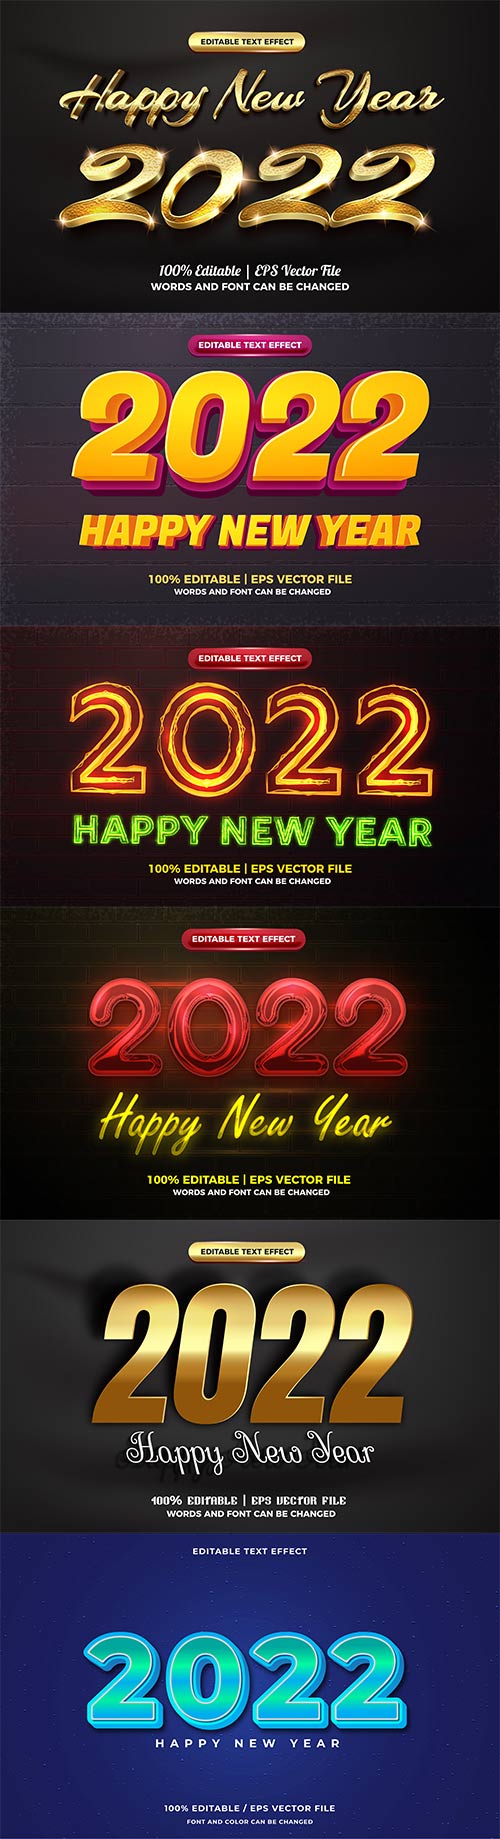 Happy new year 2022 3d gold text style effect vector